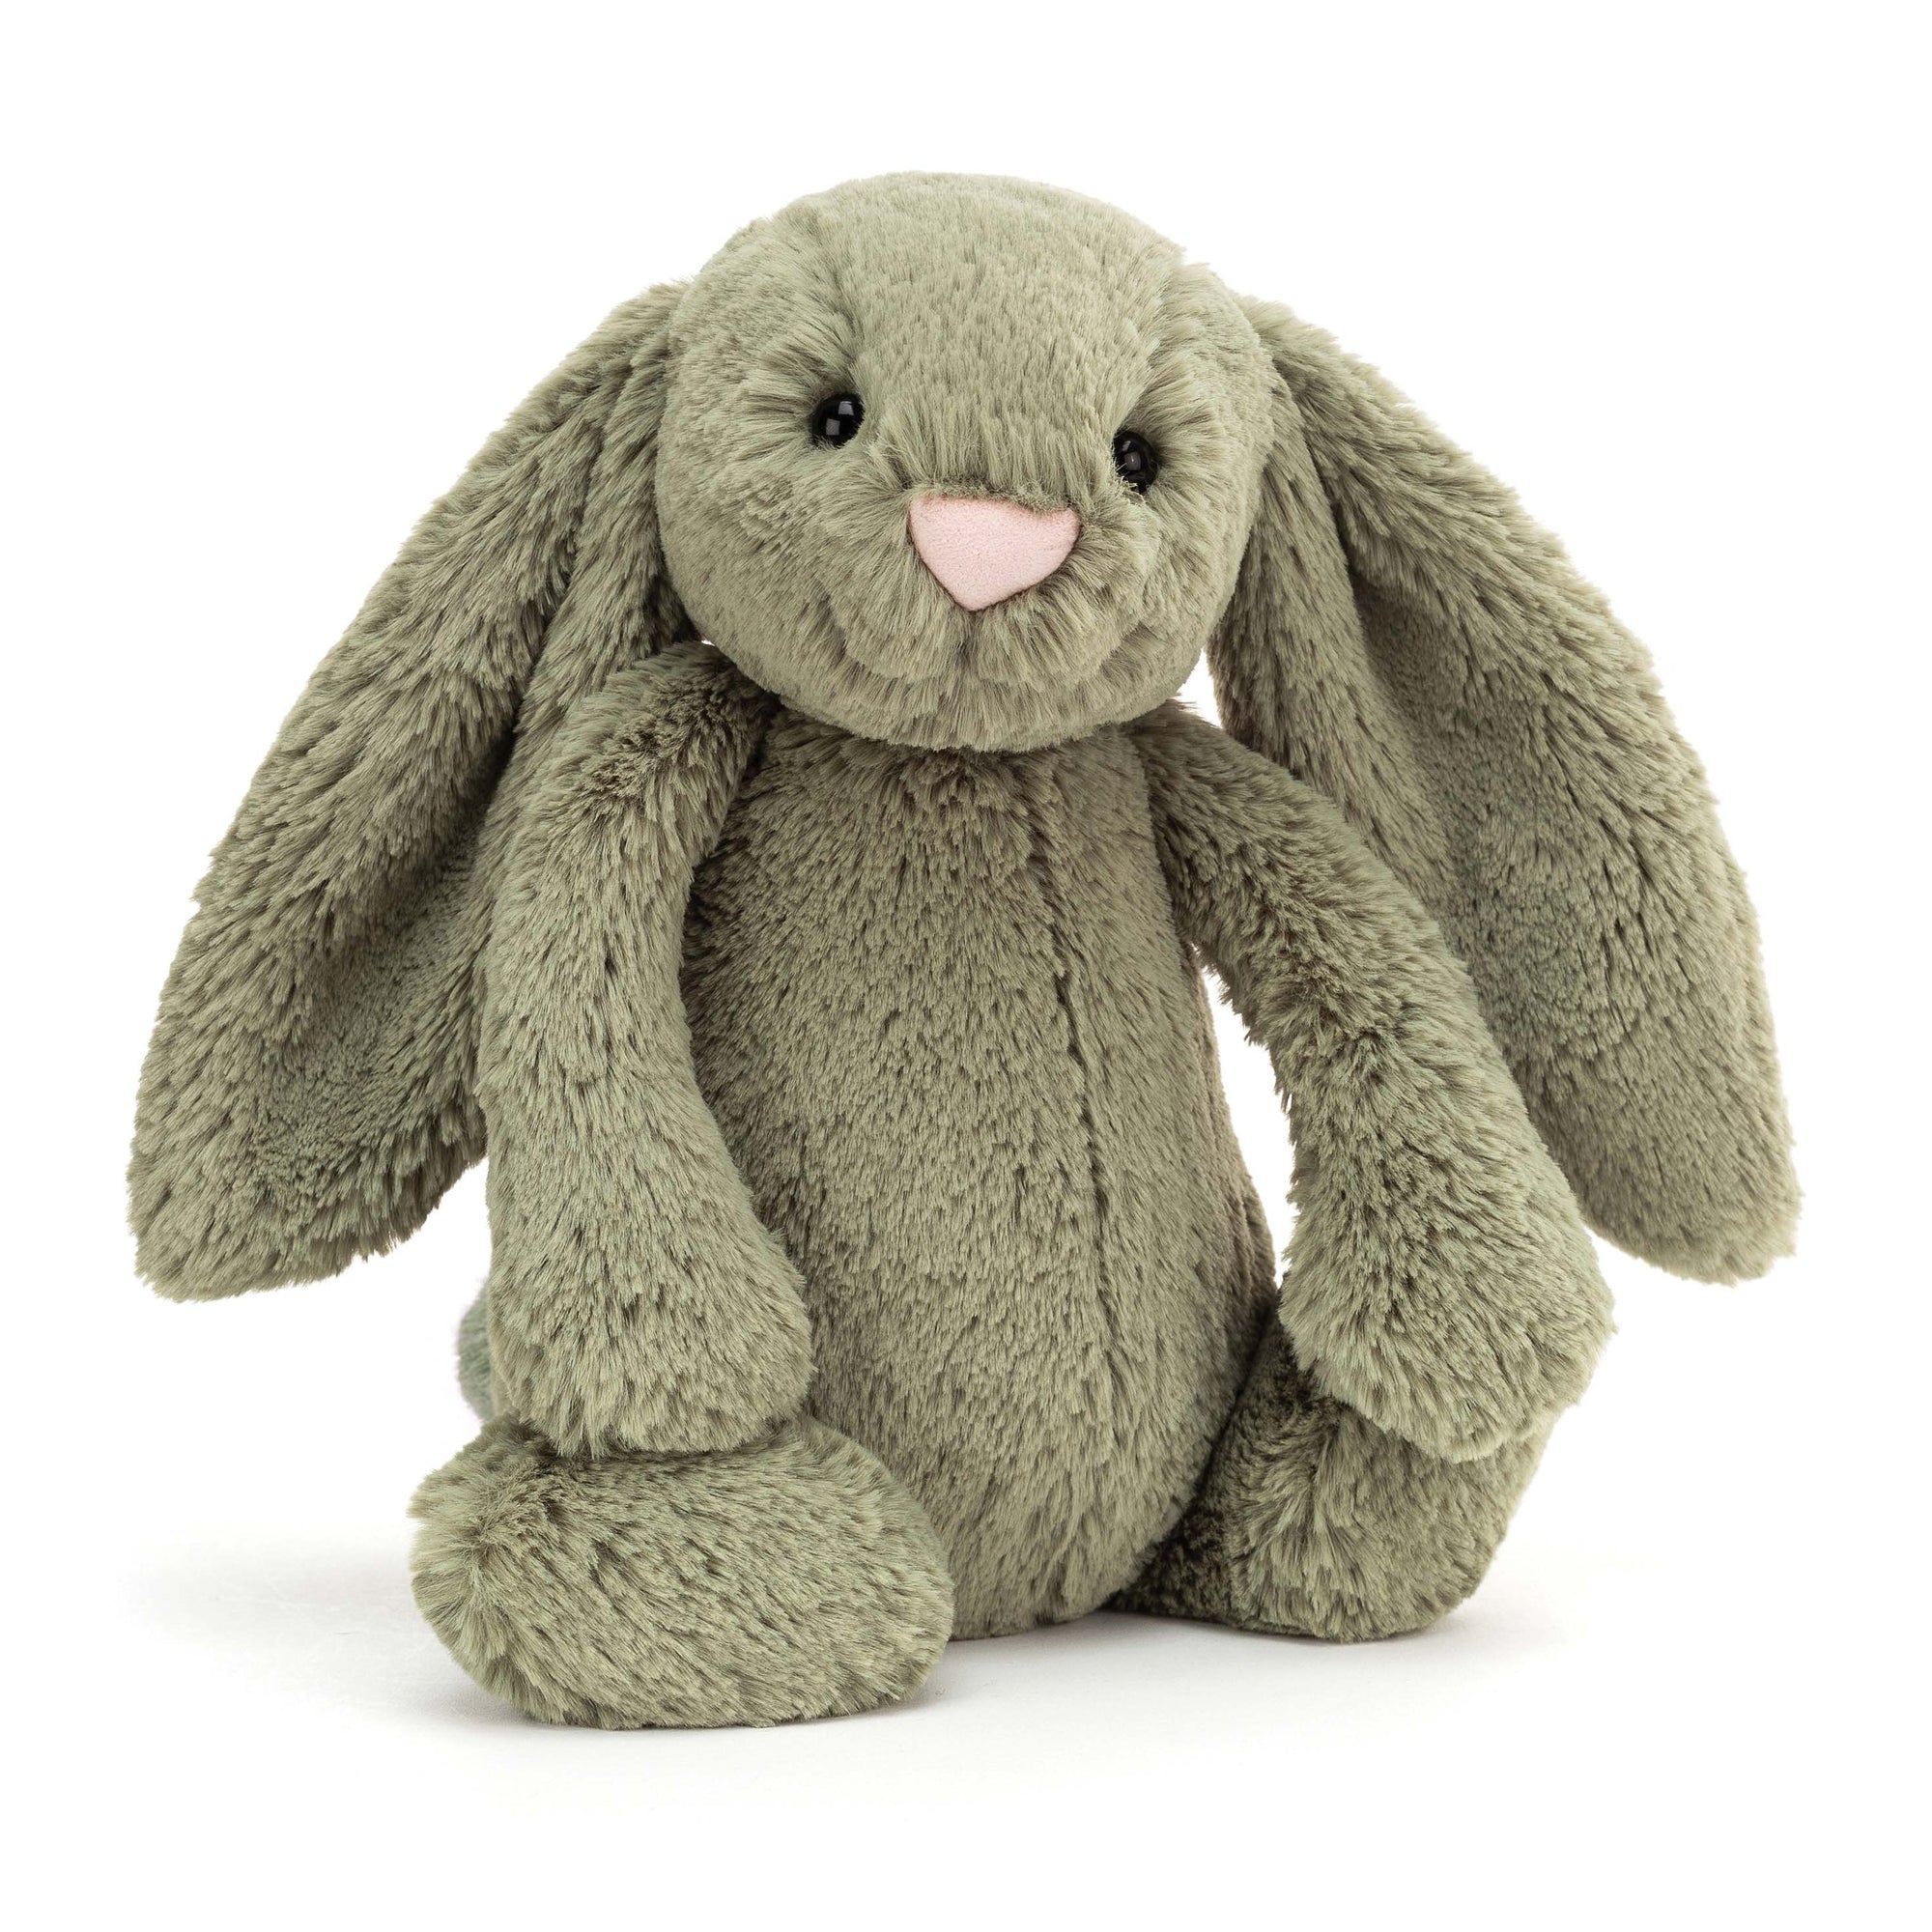 Jellycat bunny - angus and dudley